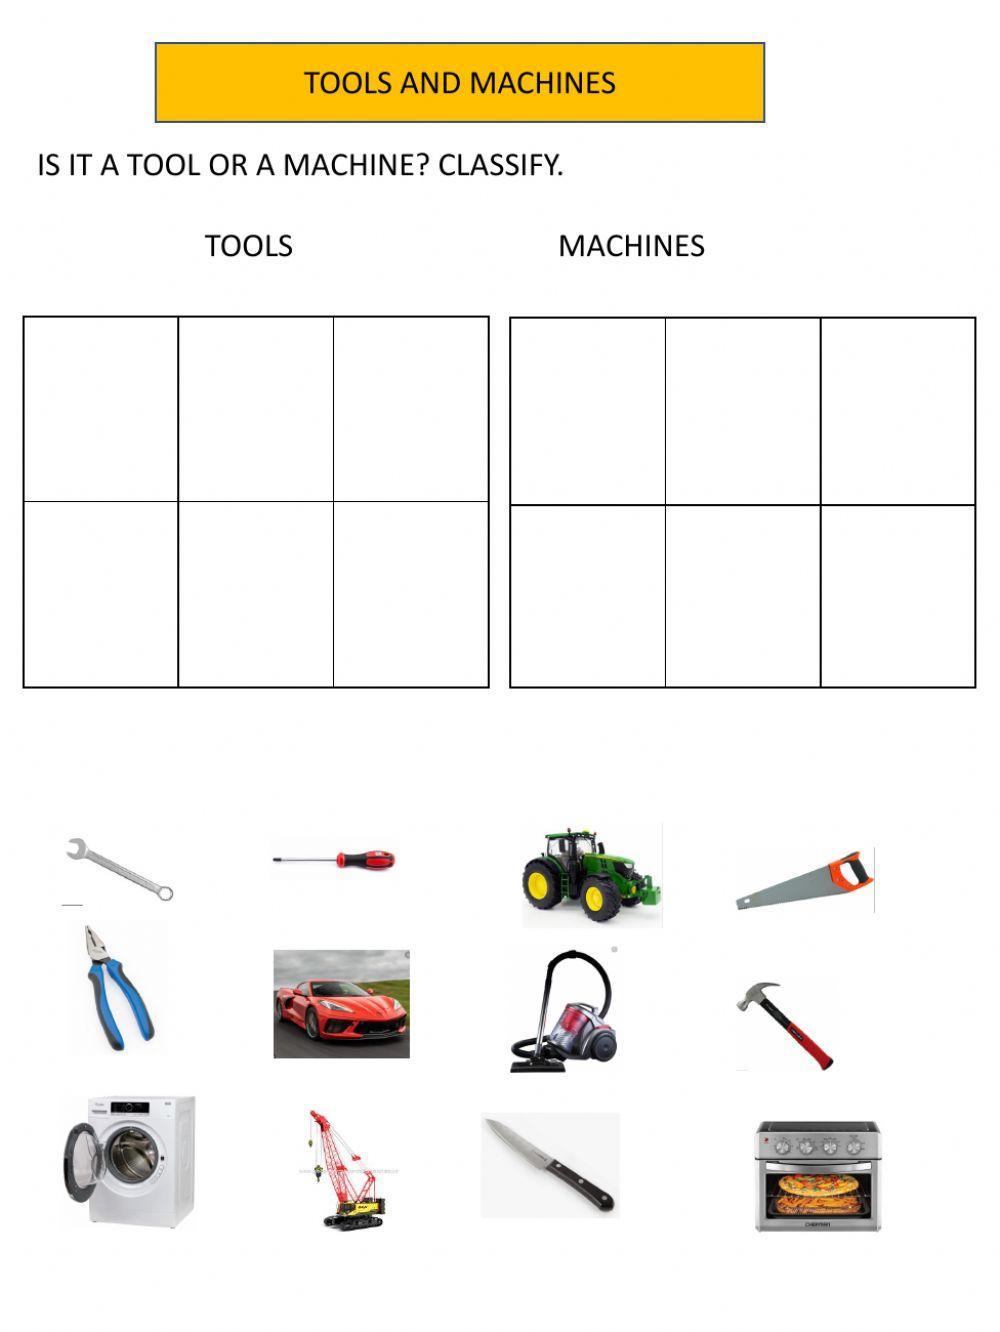 Tools and machines